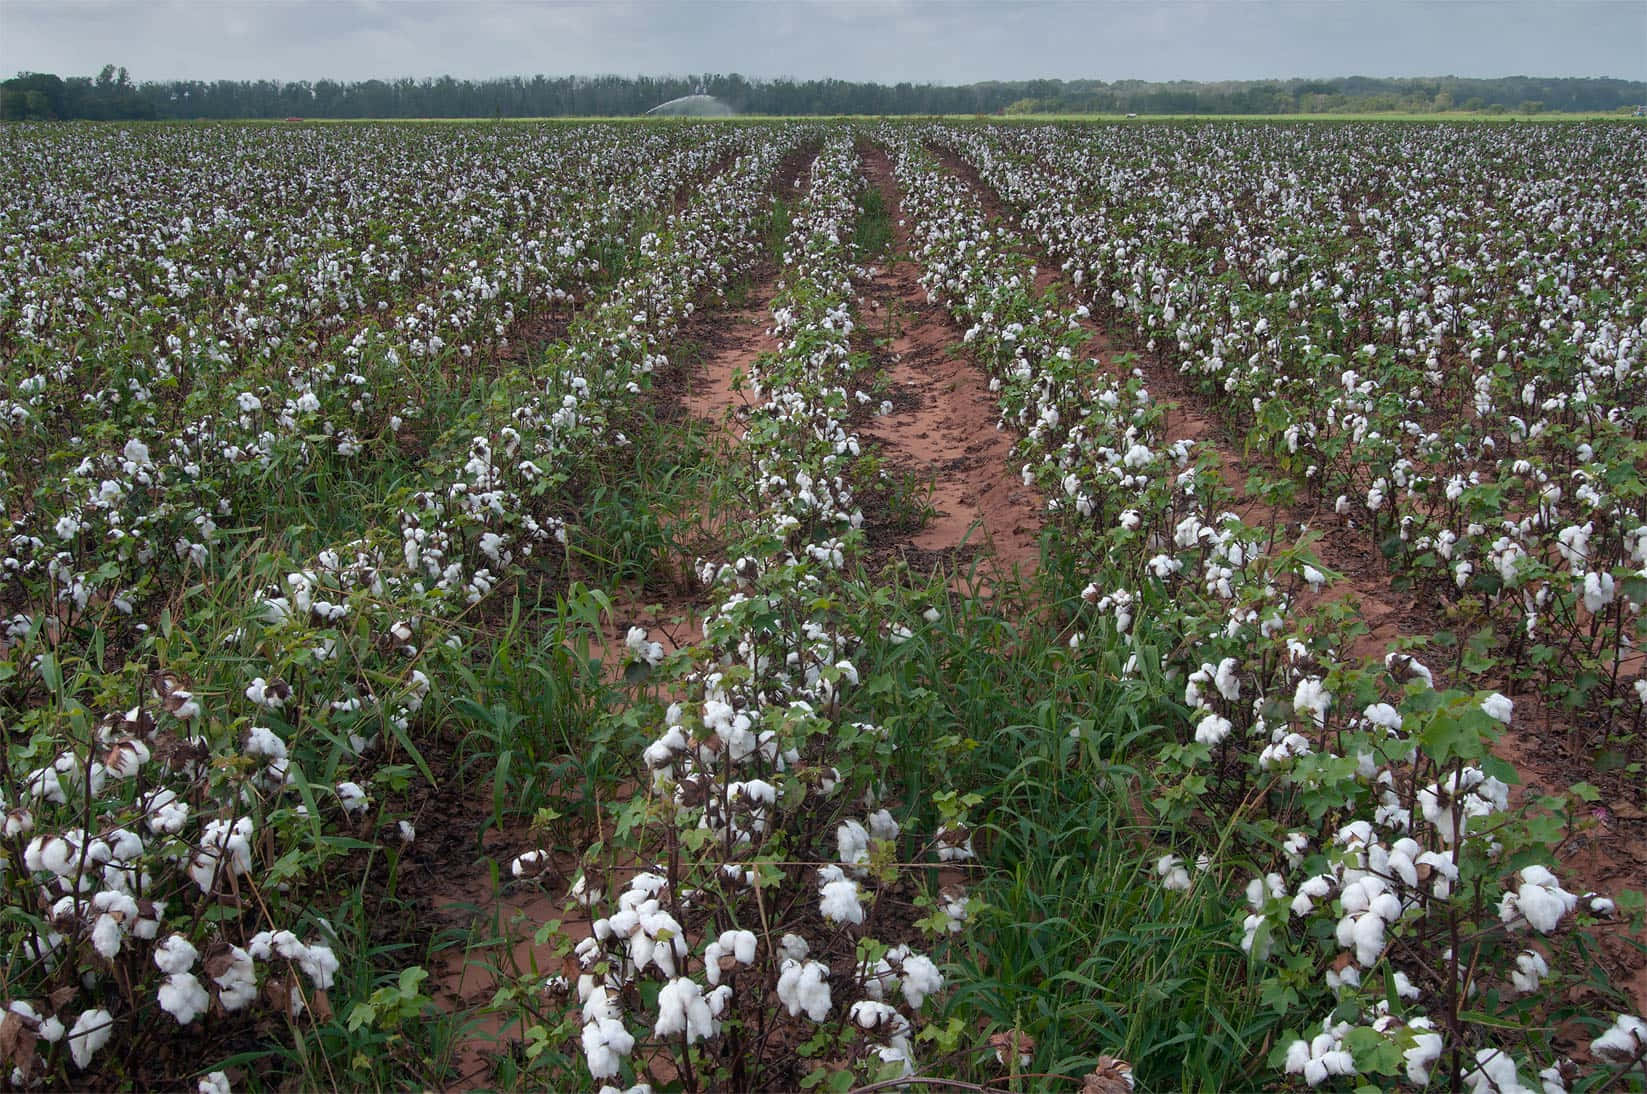 Enjoy the tranquil beauty of a cotton field